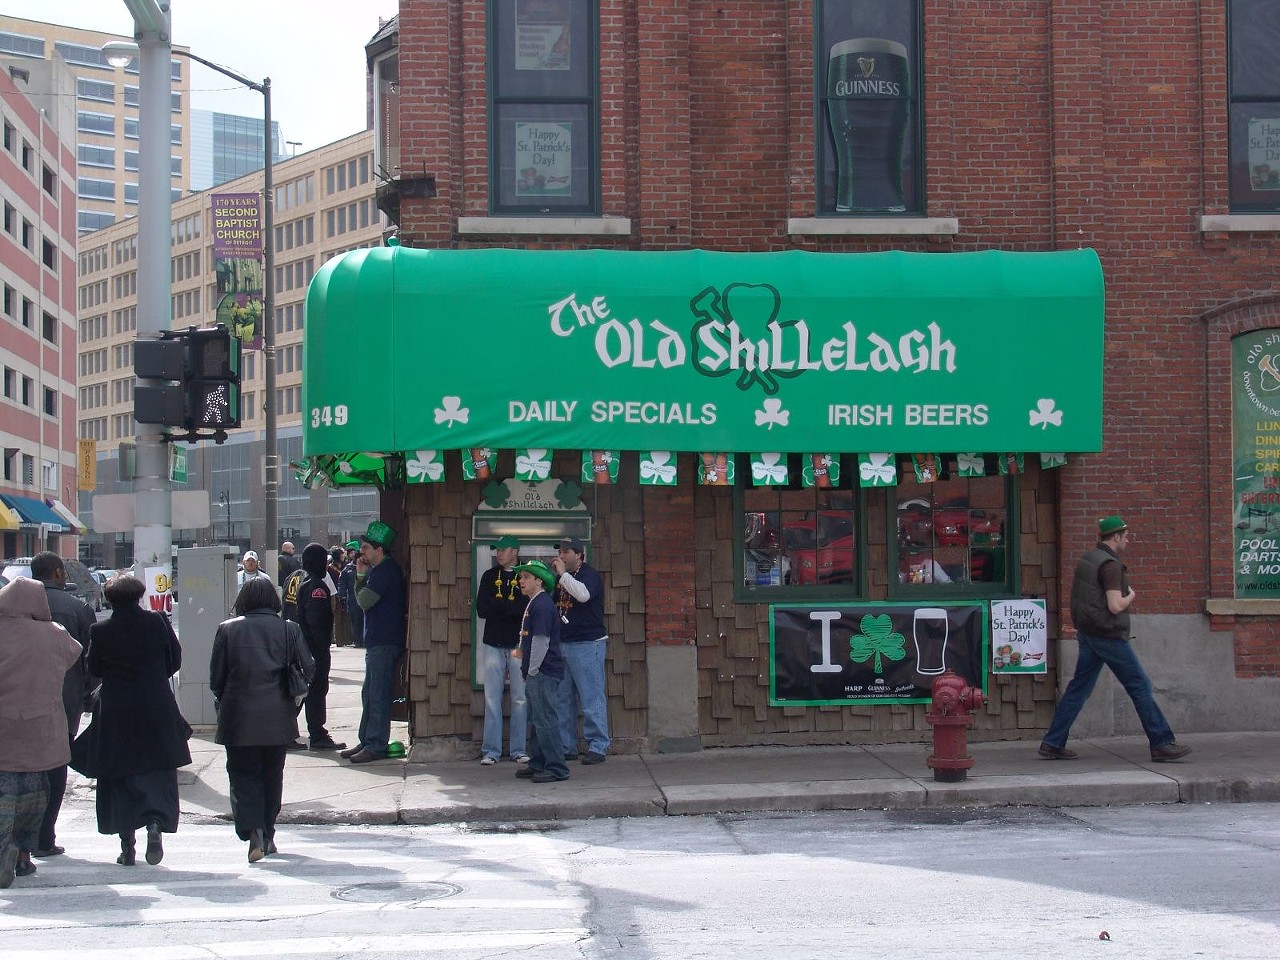 Old Shillelagh
349 Monroe St., Detroit; oldshillelagh.com
This bar, which has been voted Best Irish Pub in the Metro Times Best of Detroit reader's poll, will start its Opening Day party at 8 a.m. There will be food, live music, DJs, and a free shuttle to and from Comerica Park. It's a classic and its mellow vibe is great for sipping on brews and watching sports.